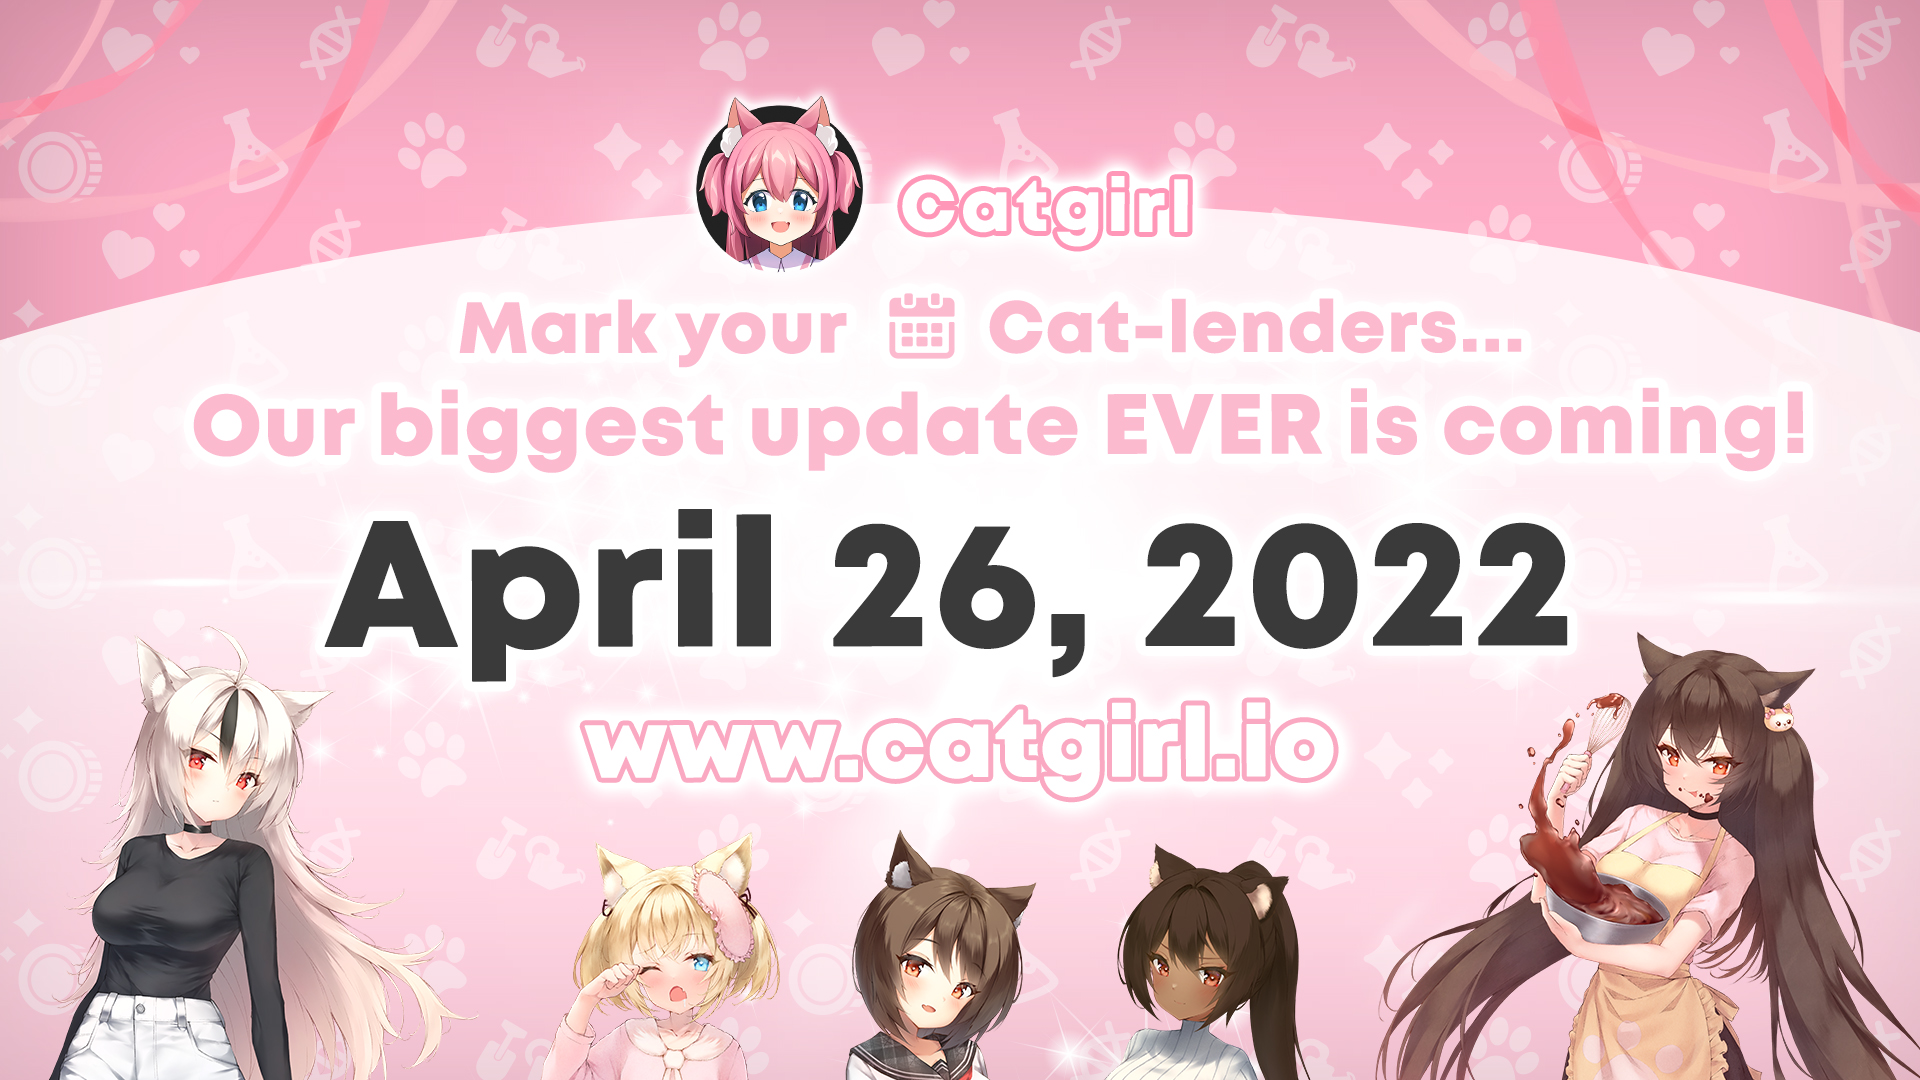 Catgirl Version 2.0 of the DApp is Now Live!, by Catgirl